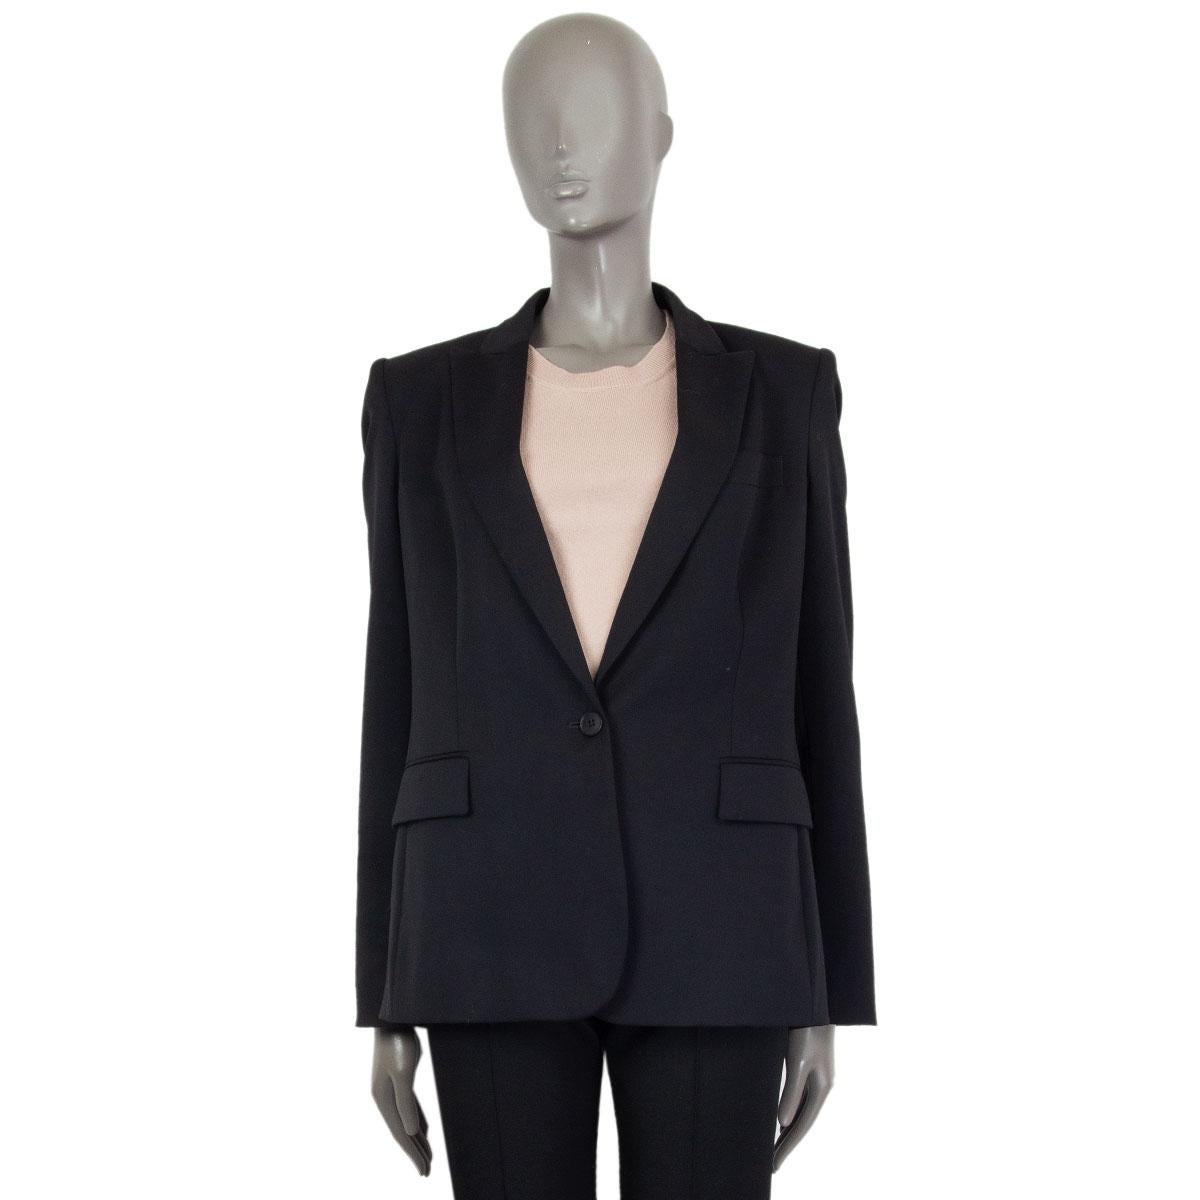 authentic Stella McCartney one-button blazer in black wool (100%) with notch collar. Closes with one button and has flap pockets. Lined in black viscose (52%) and cotton (48%). Has been worn and is in excellent condition.     

Tag Size 44
Size